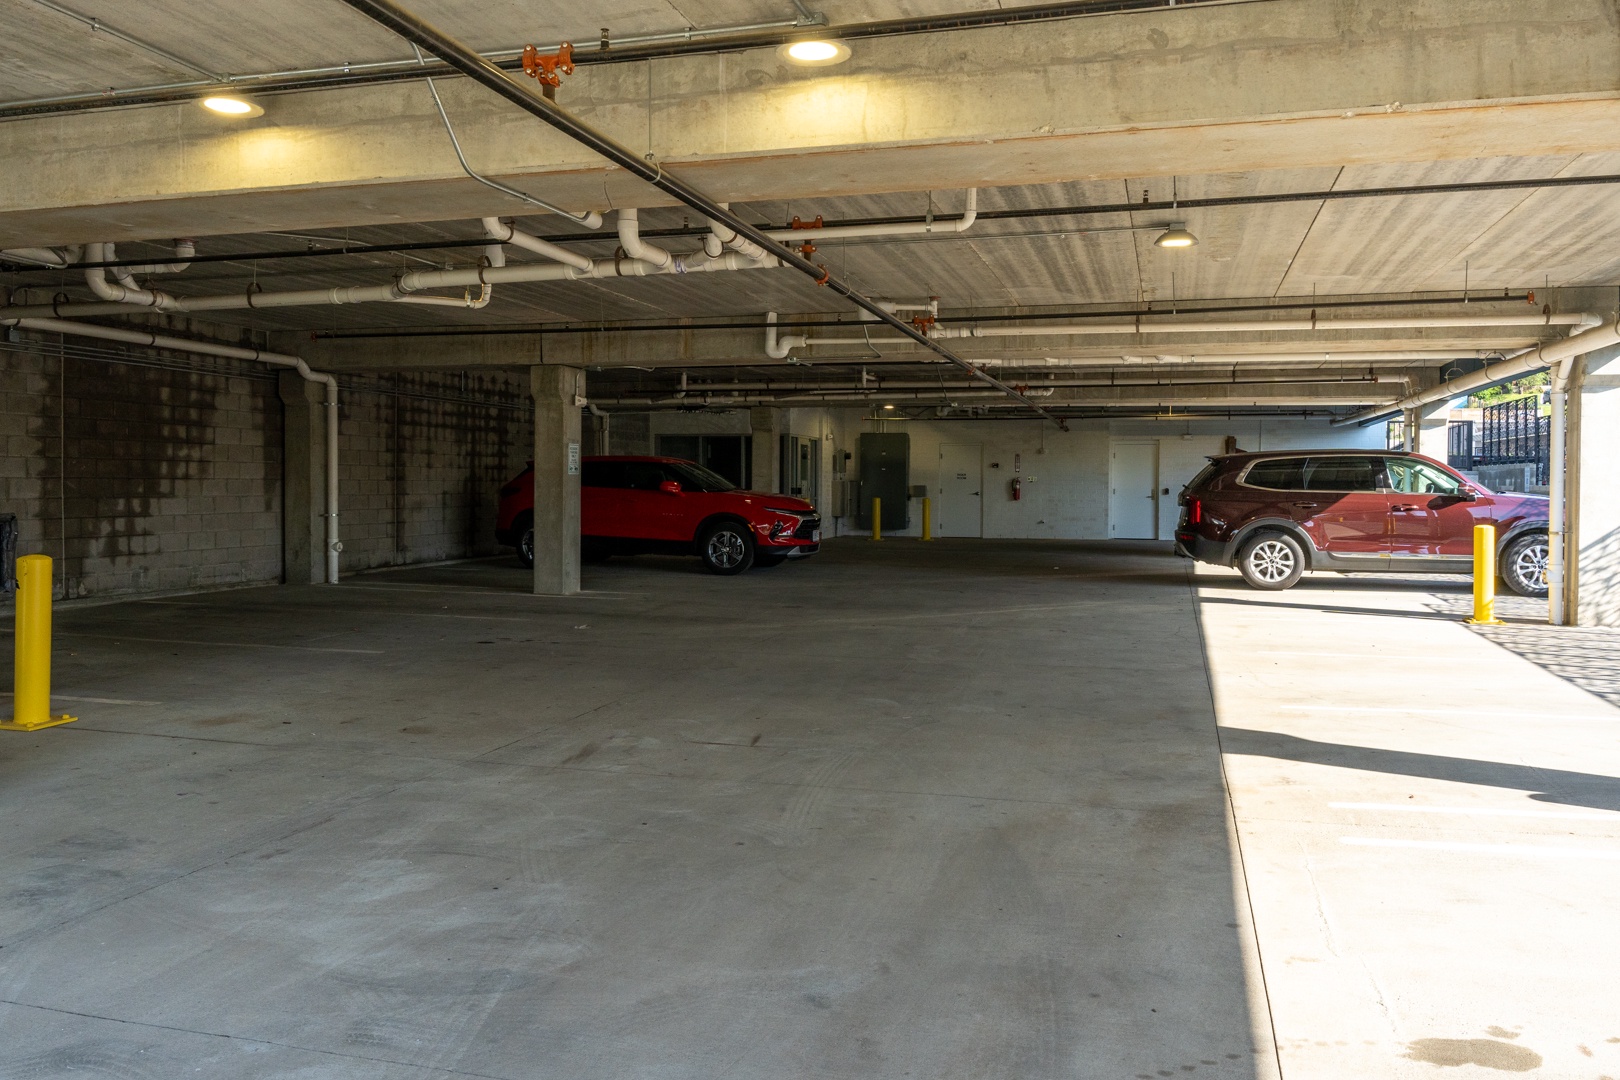 This condo offers garage parking for up to 1 vehicle